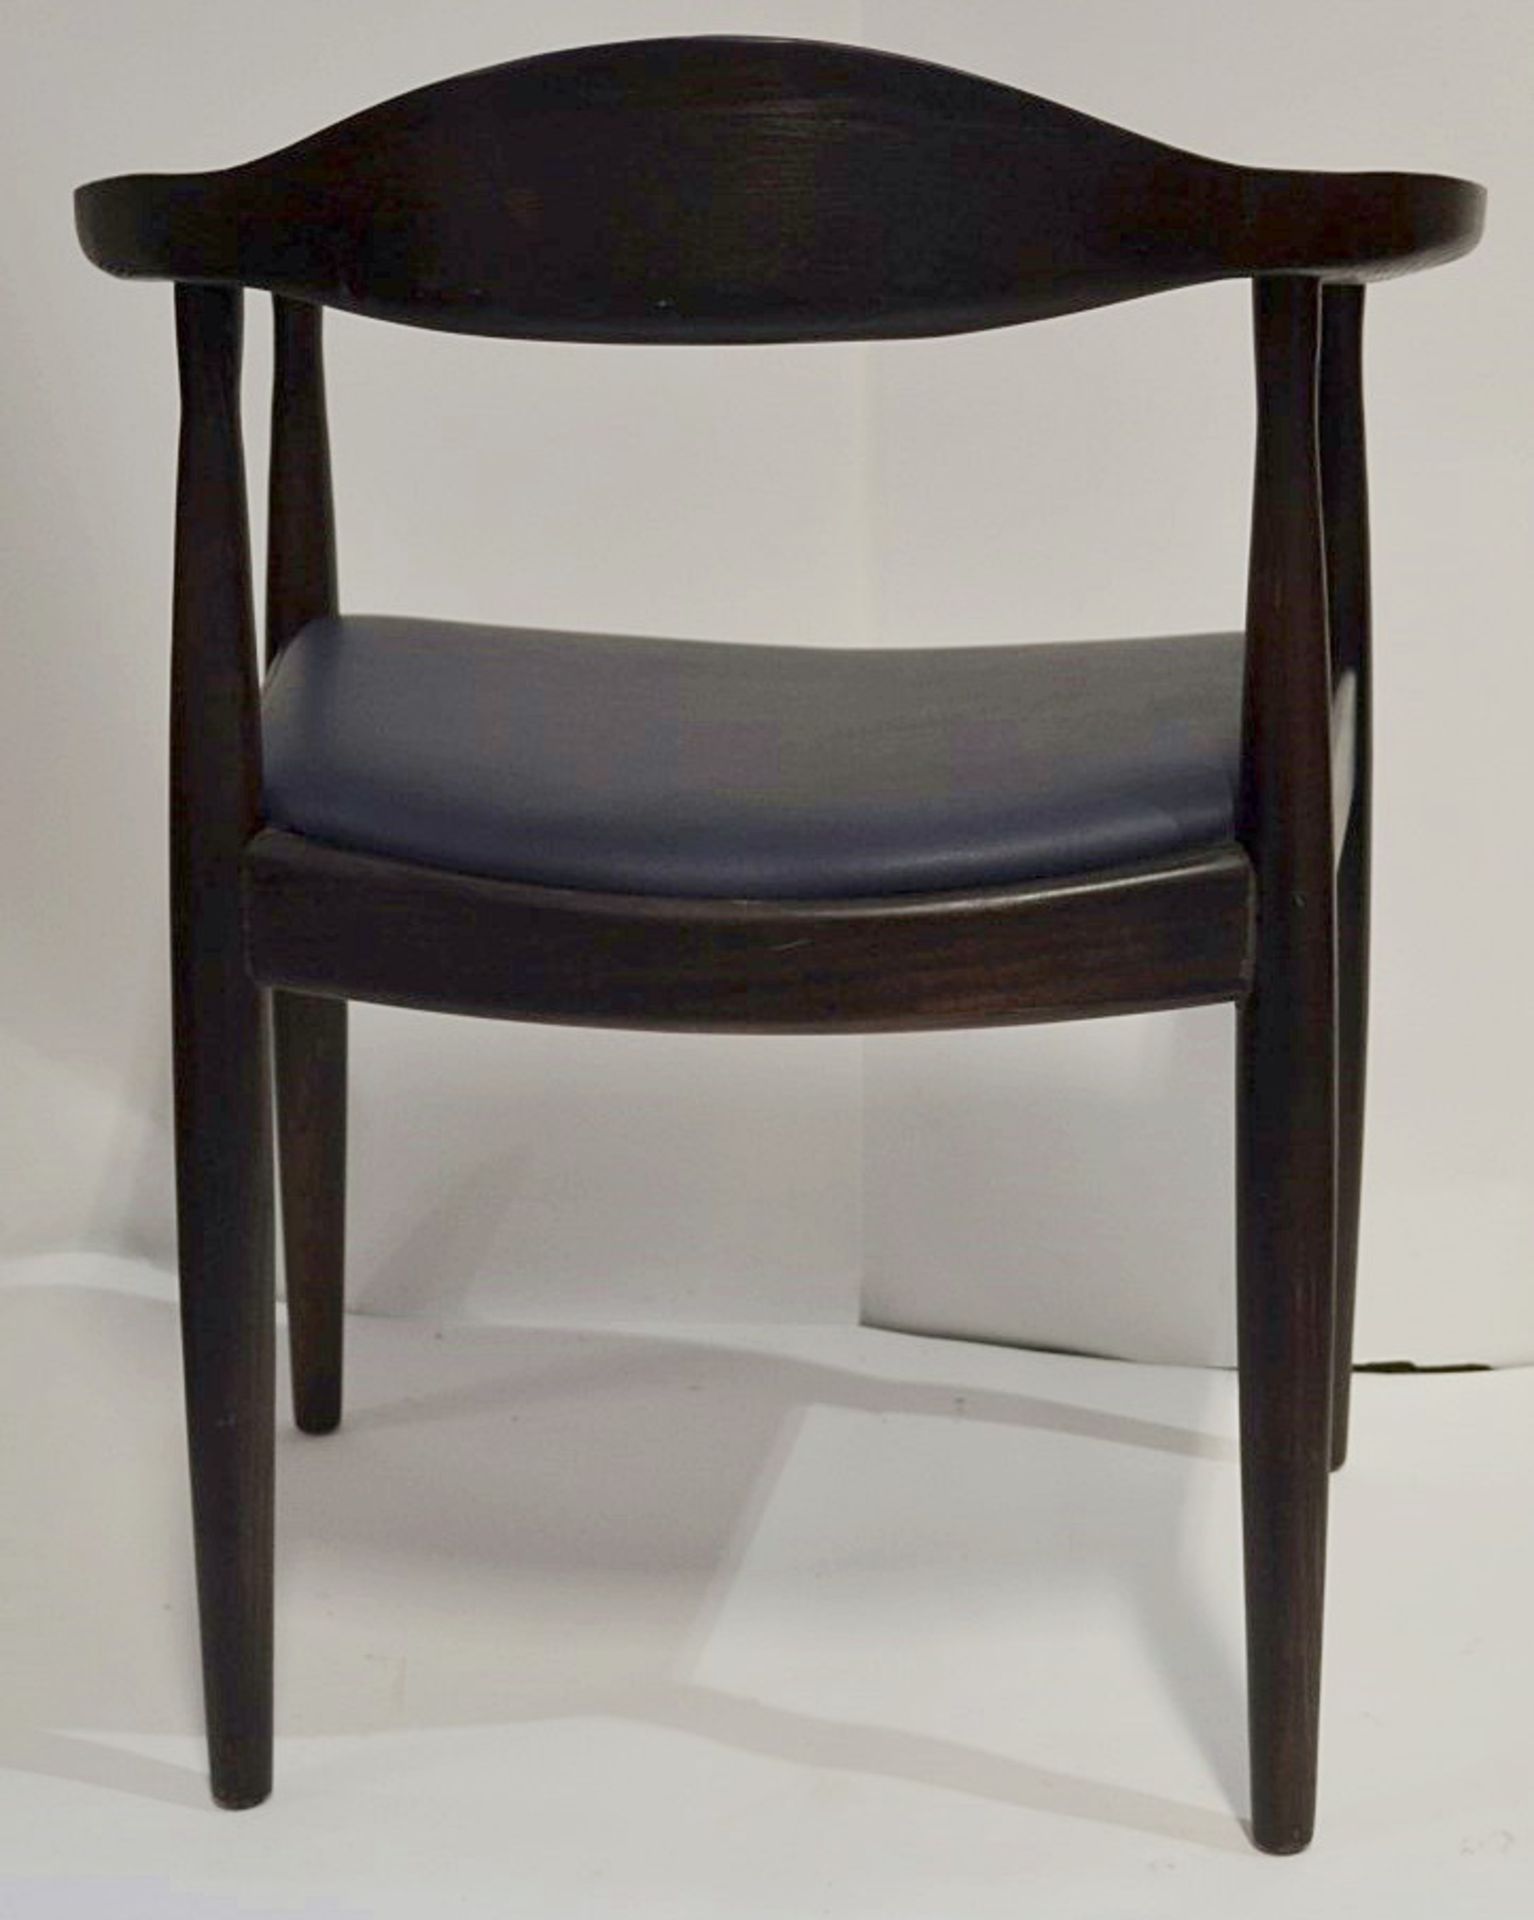 4 x Wooden Dining Chairs With Upholstered Seats - Dimensions: H78 x W64 x D57cm, Seat Height: 47cm - - Image 2 of 4